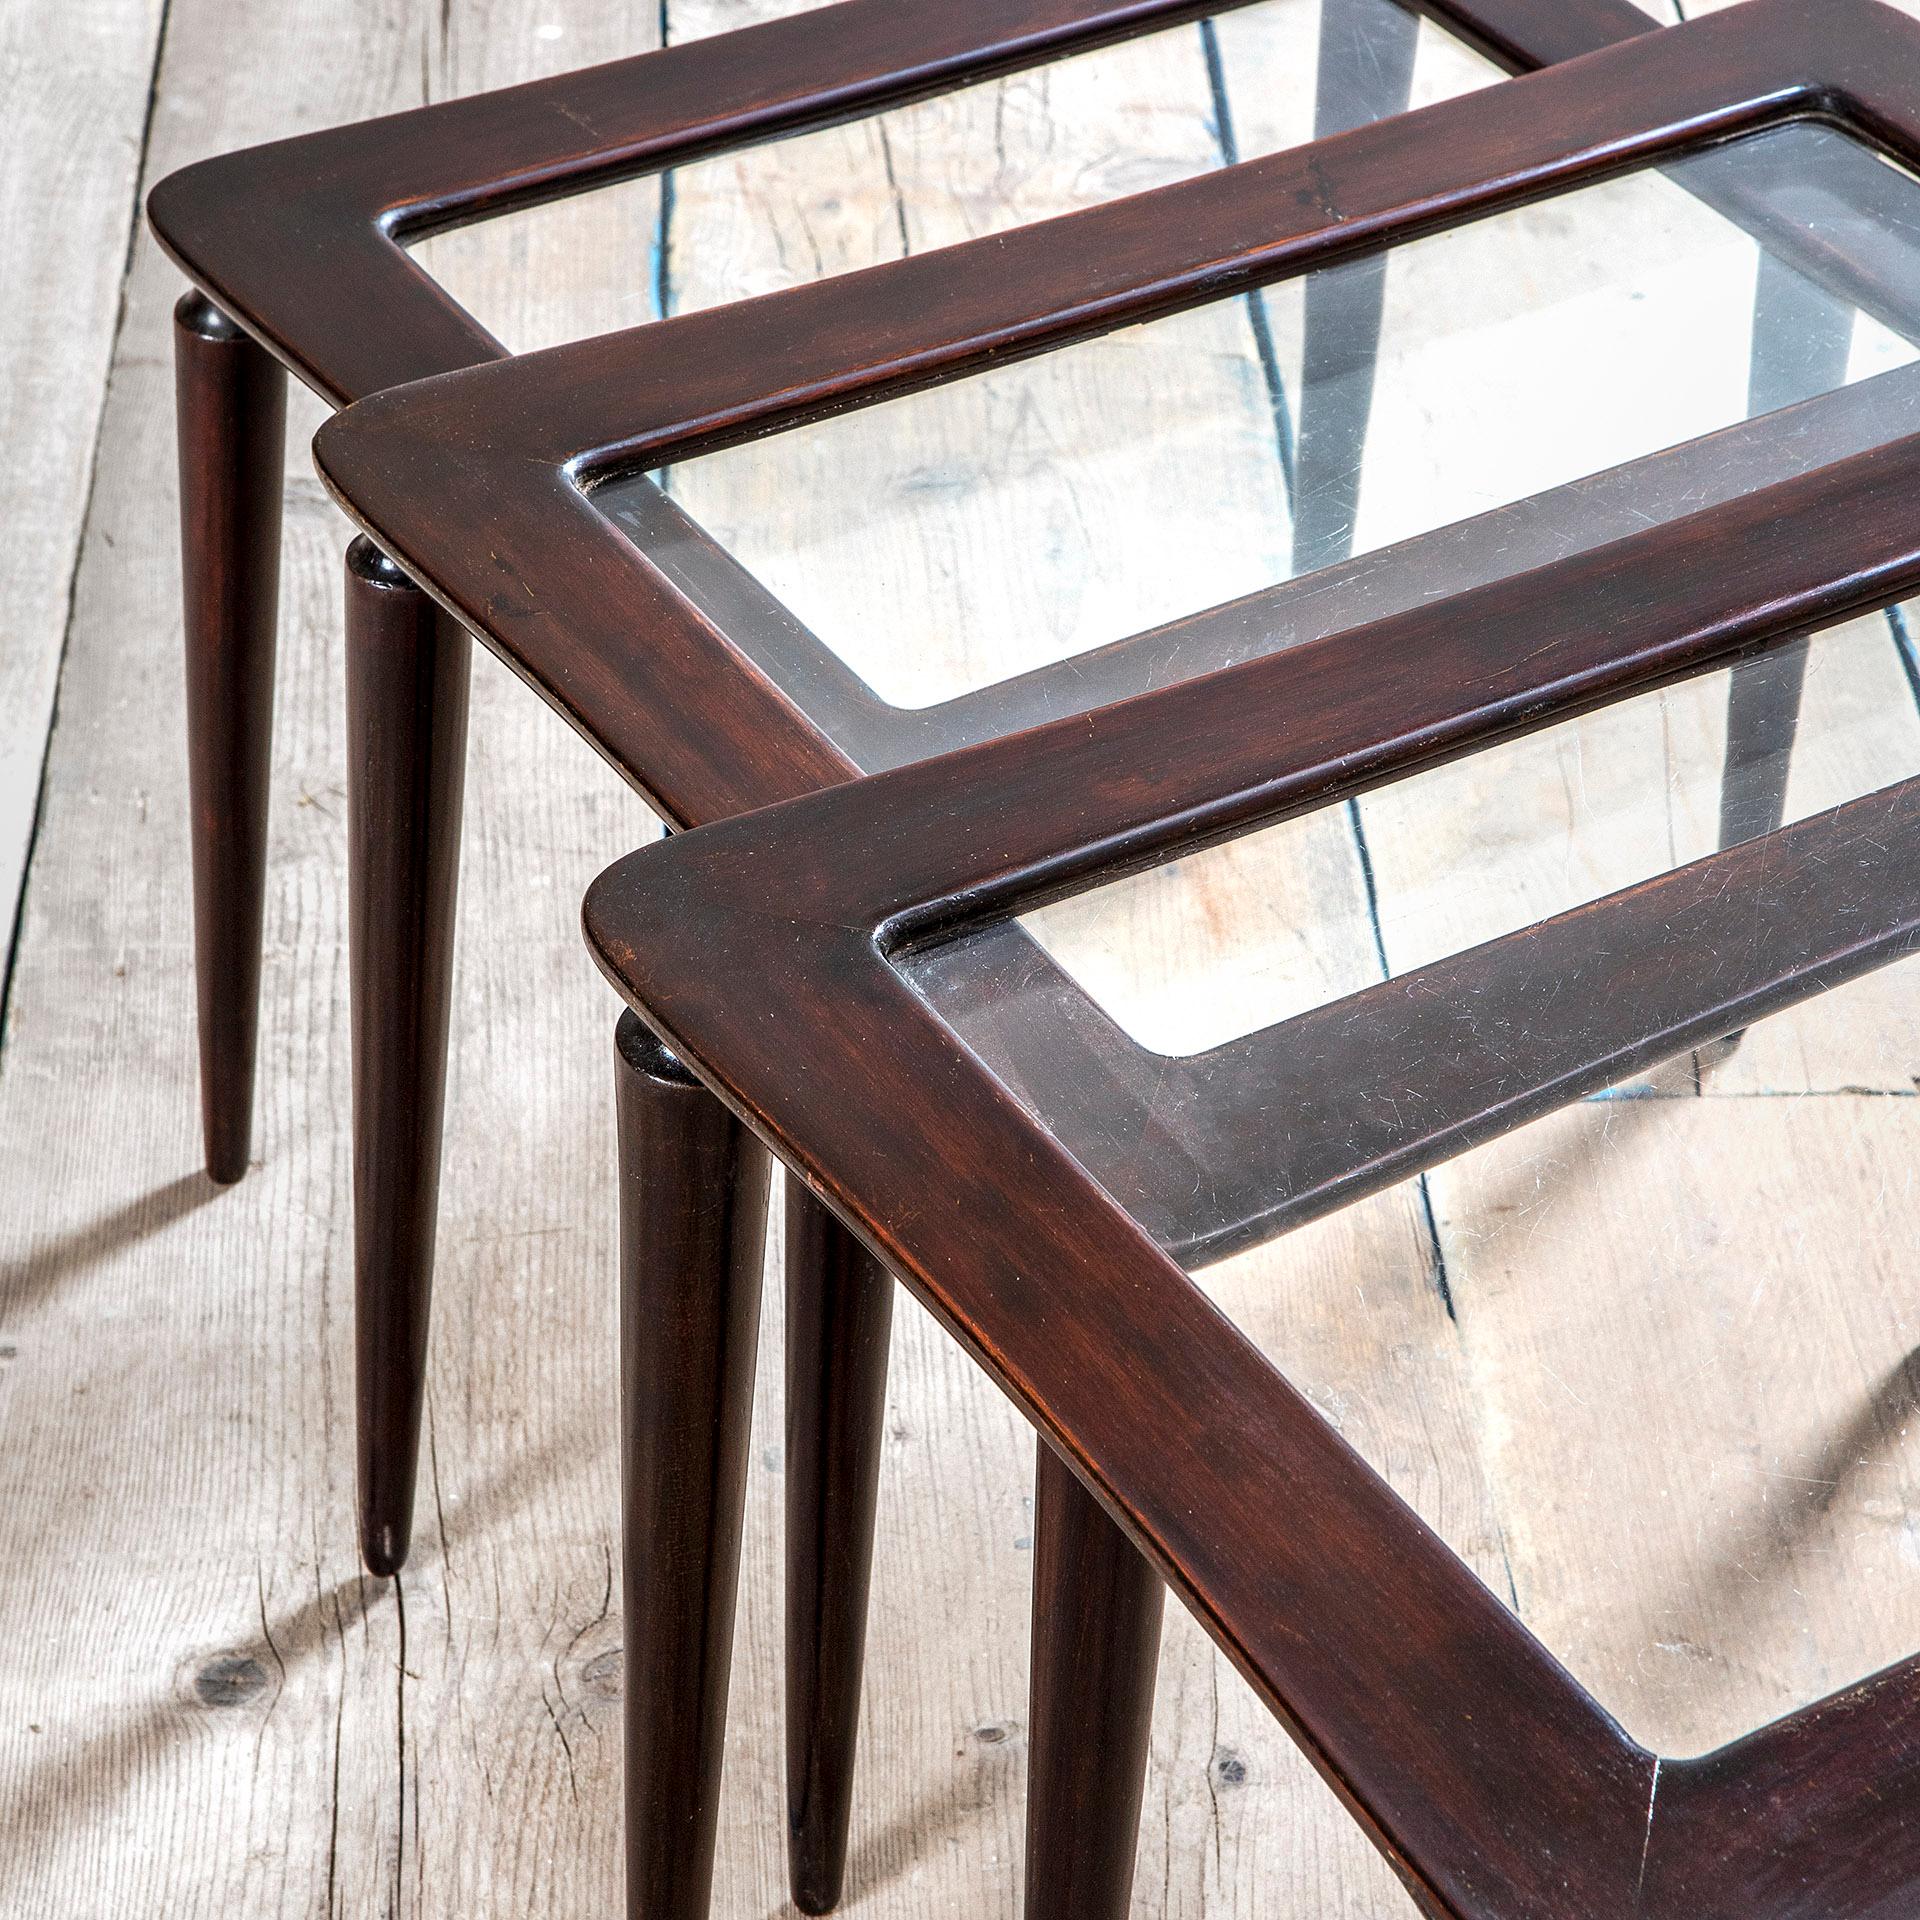 Italian 20th Century Ico Parisi Stackable Tables for De Baggis Wood and Glass from 1950s